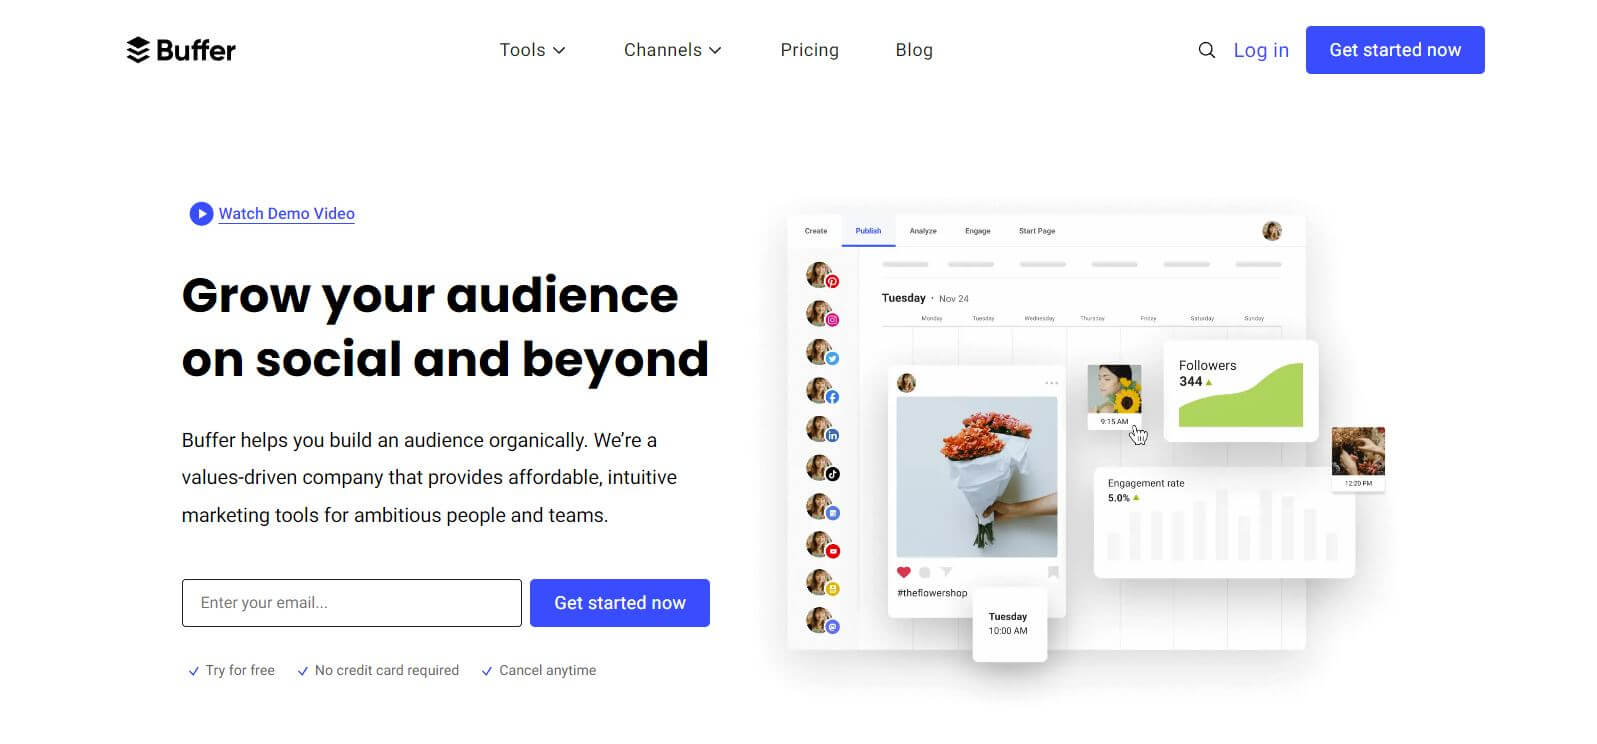 Buffer homepage promoting social media growth tools with a dashboard image displaying posts, engagement rates, and follower growth. Call-to-action button for starting a free trial.